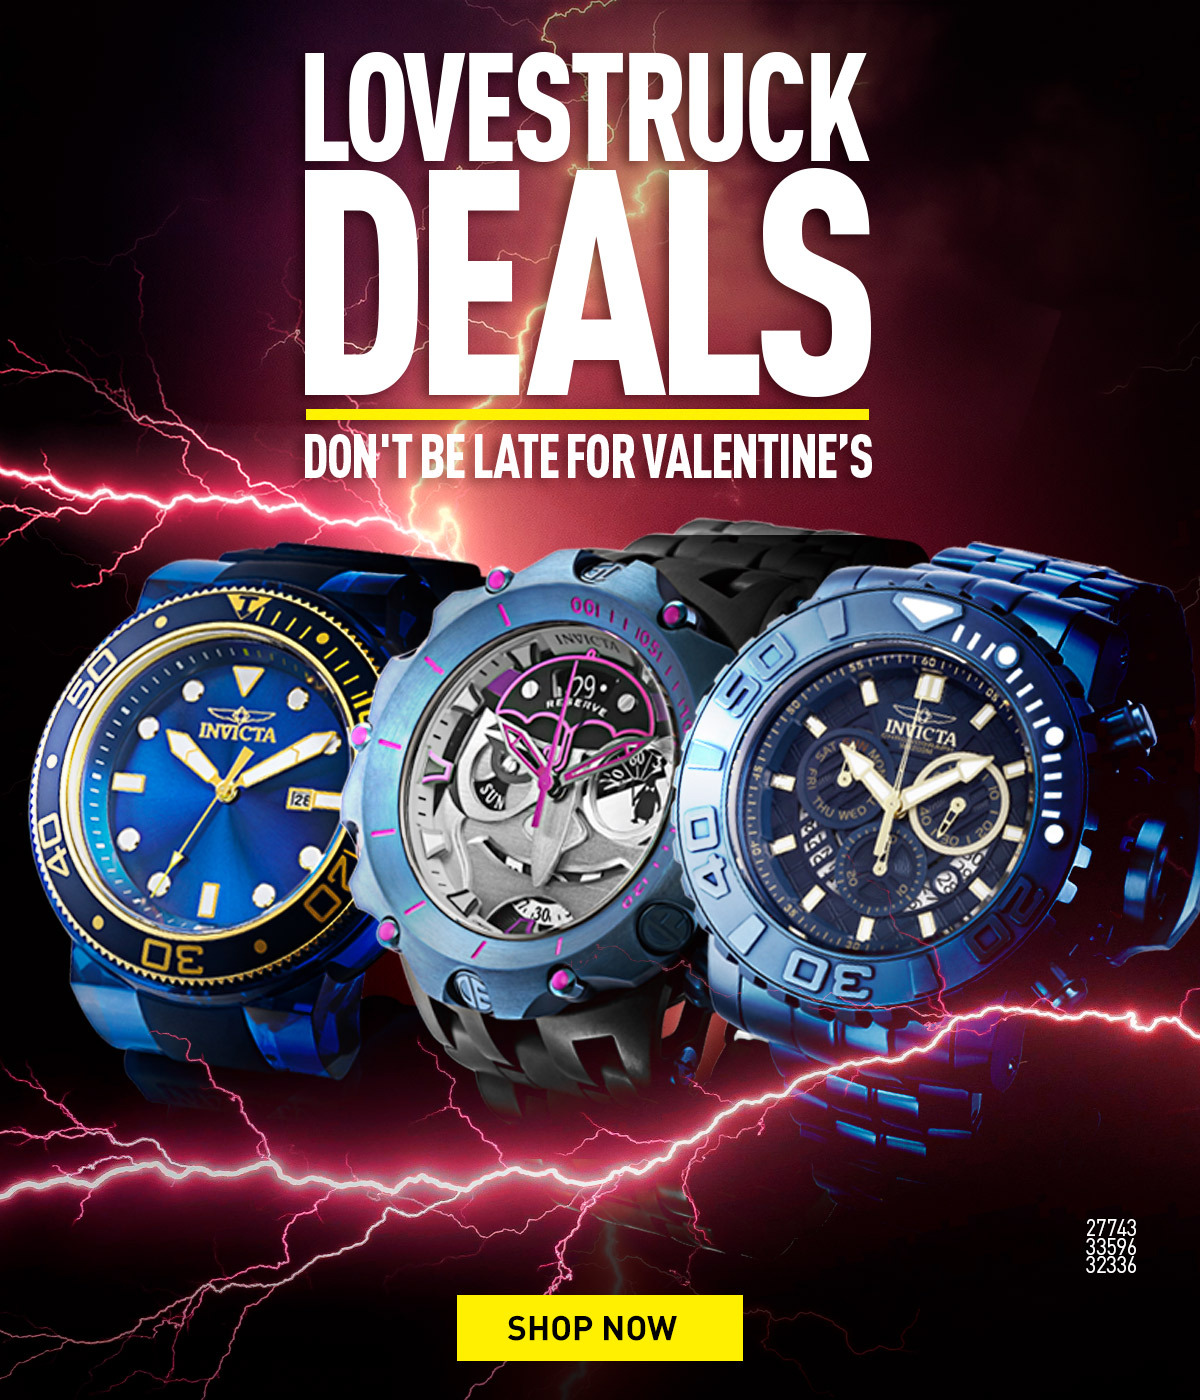 Lovestruck Deals! Don't be late for valentine's day